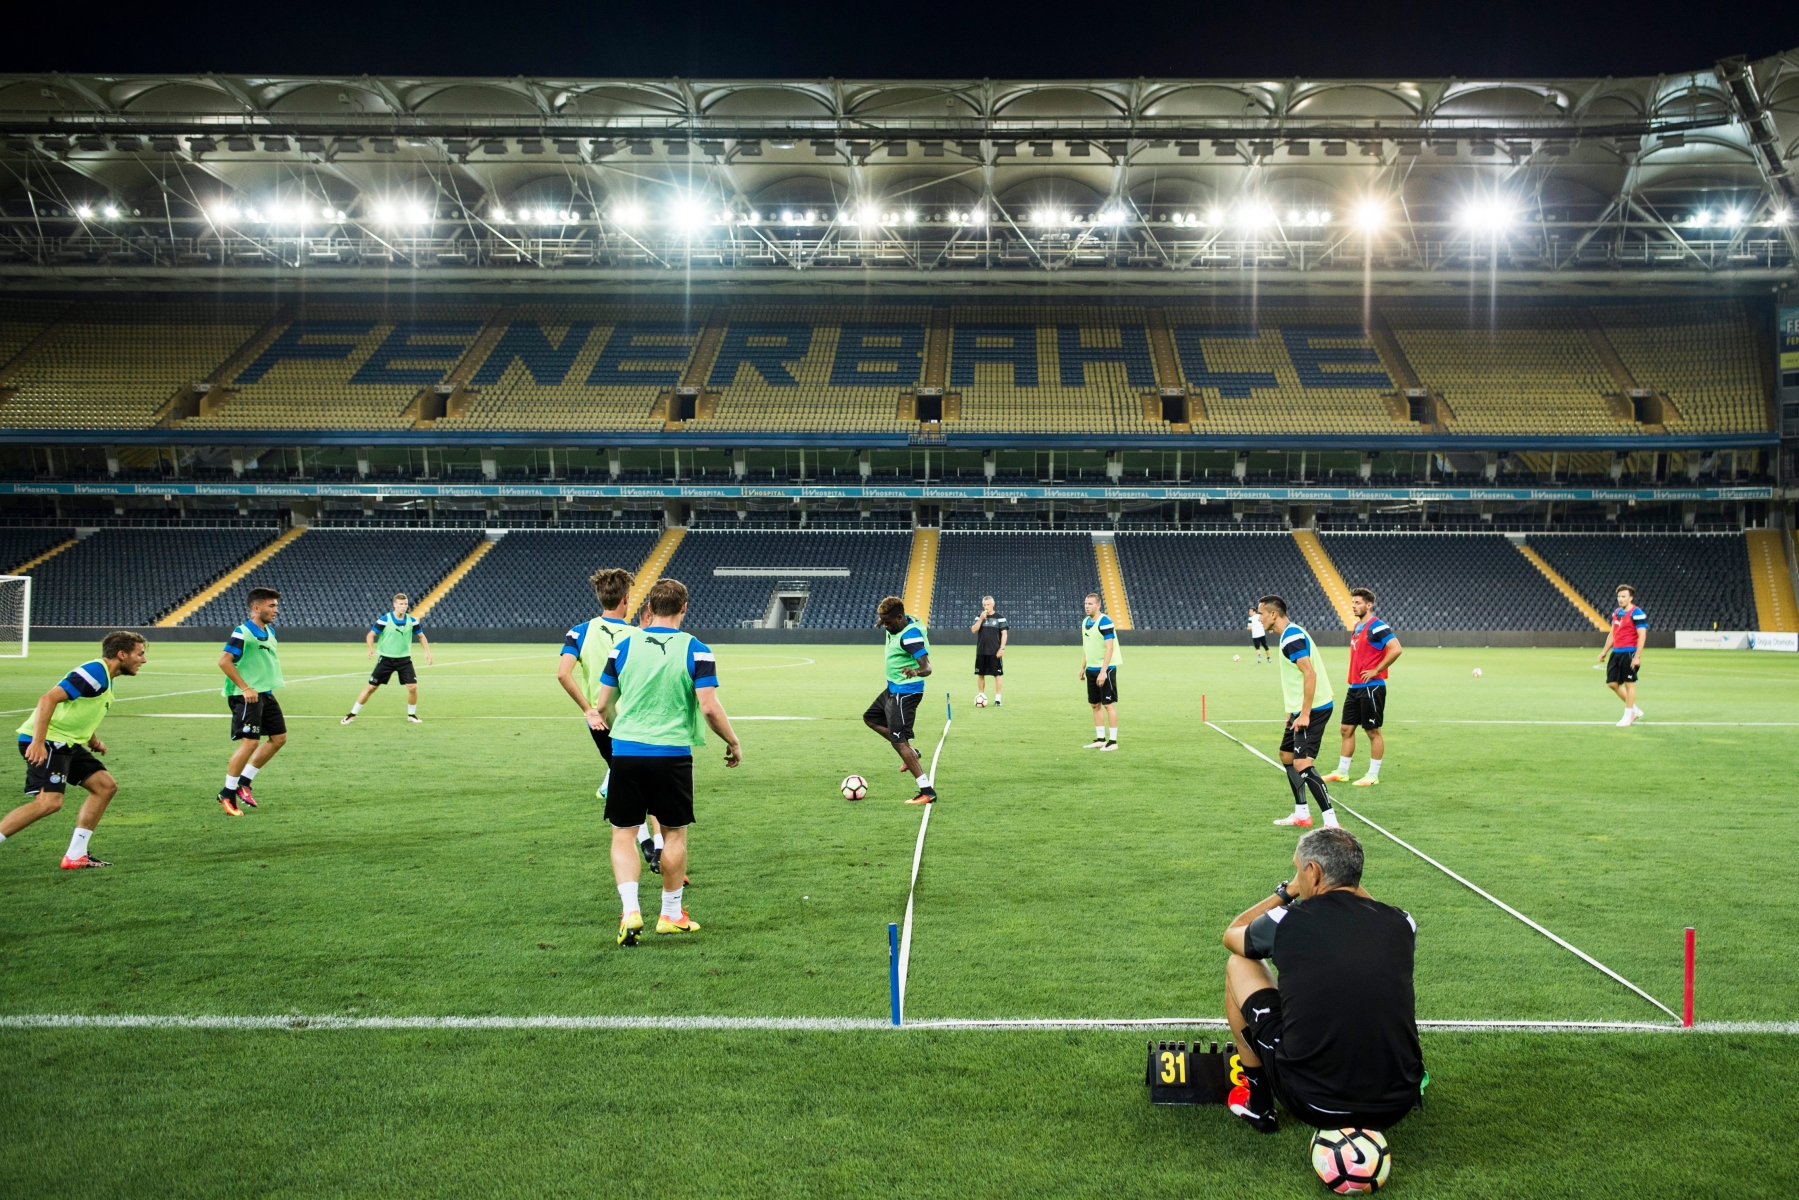 A general view of the stadium during a training session of Grasshopper Club Zuerich, one day prior to the UEFA Europa League playoff soccer match between Fenerbahce Istanbul (Turkey) and Grasshopper Club Zuerich (Switzerland) held at the Sukru Saracoglu Stadium in Istanbul, Turkey, on Wednesday, August 17, 2016. (KEYSTONE/Gian Ehrenzeller) FUSSBALL EUROPA LEAGUE 2016/17 FENERBAHCE GC